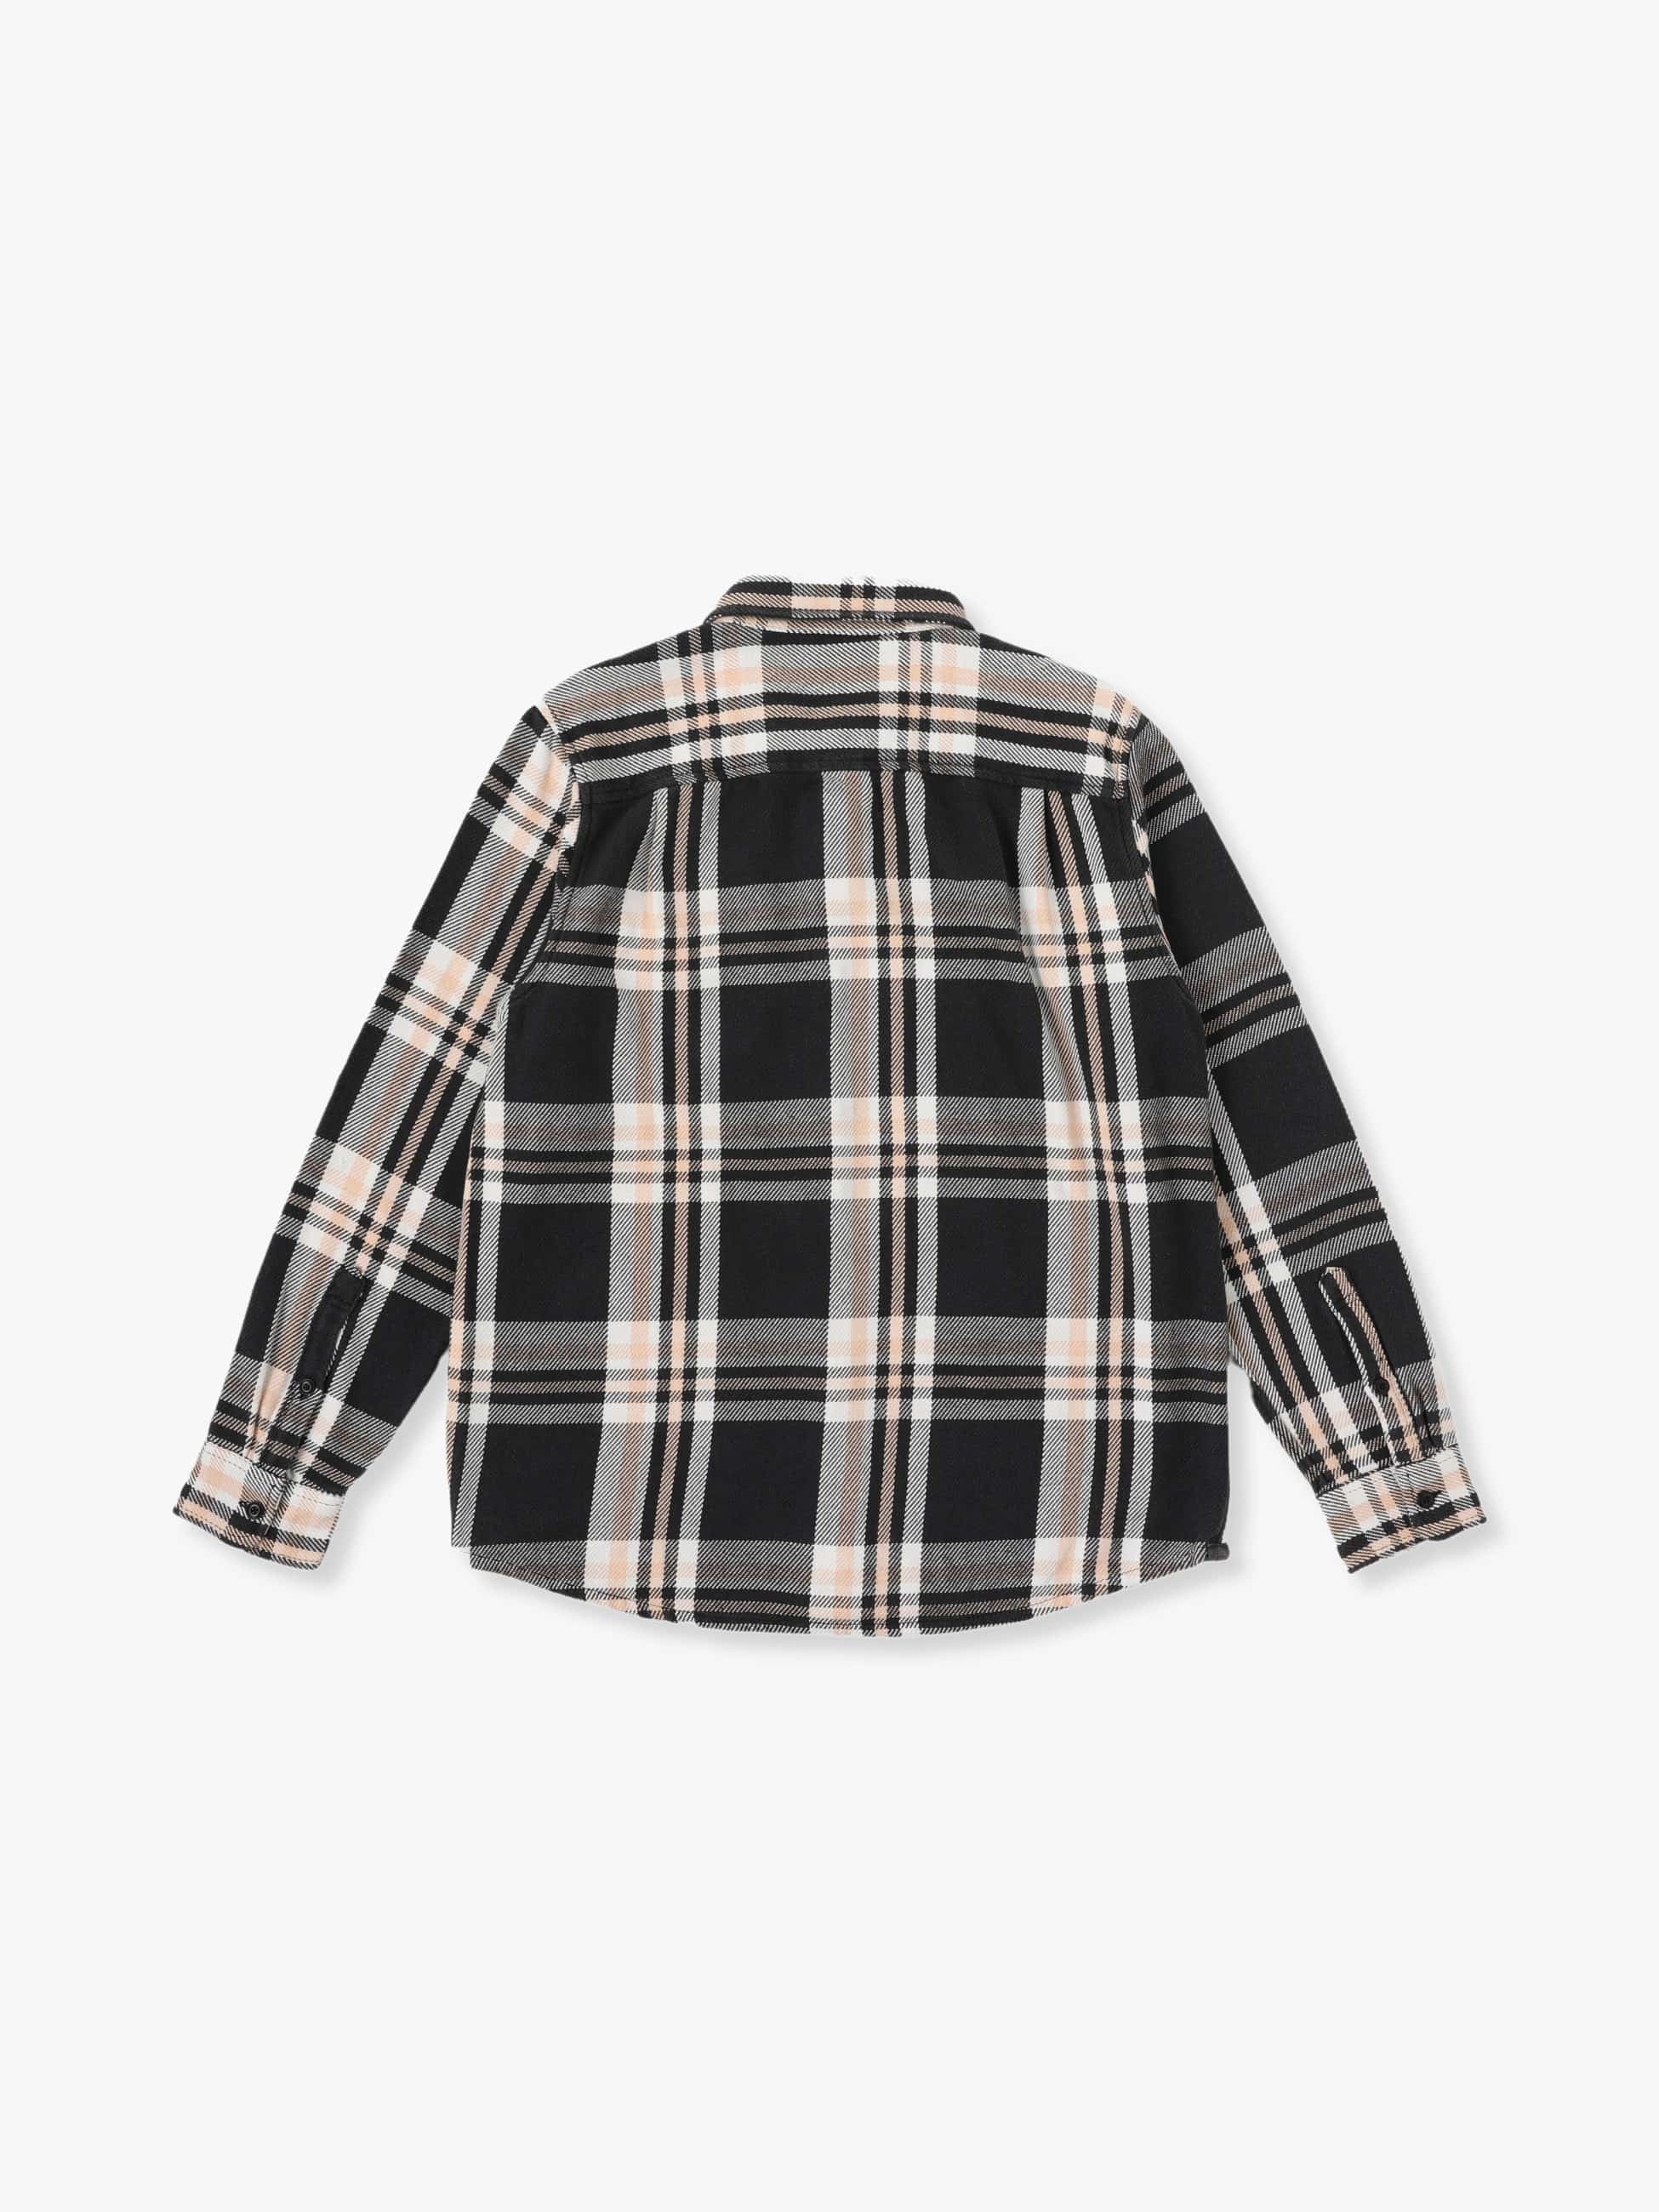 OUTERKNOWN 10 Years Washed Blanket Shirt